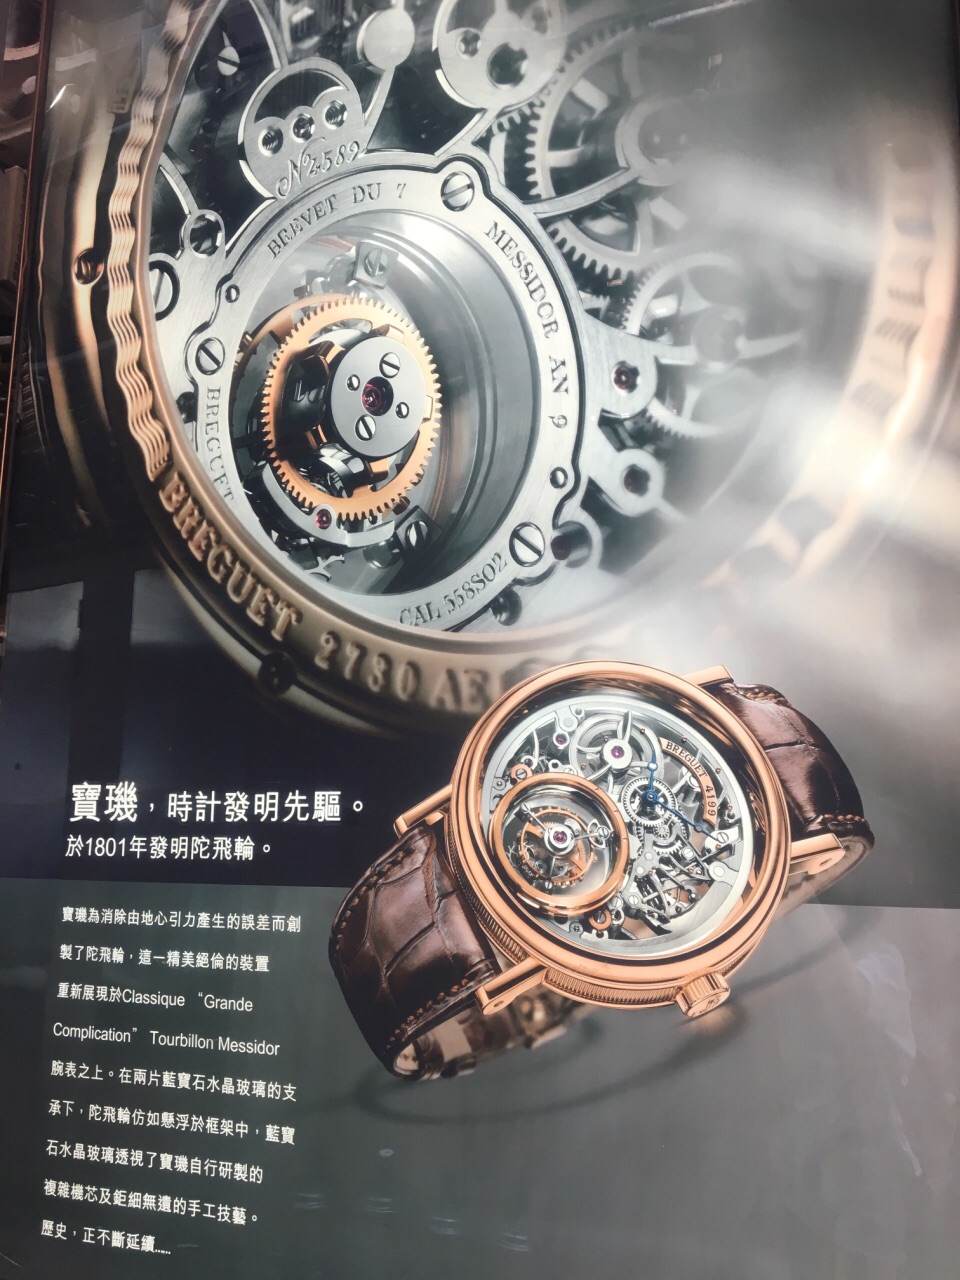 Emperor Watch and Jewellery(Causeway Bay) travel guidebook –must visit  attractions in Hong Kong – Emperor Watch and Jewellery(Causeway Bay) nearby  recommendation – Trip.com